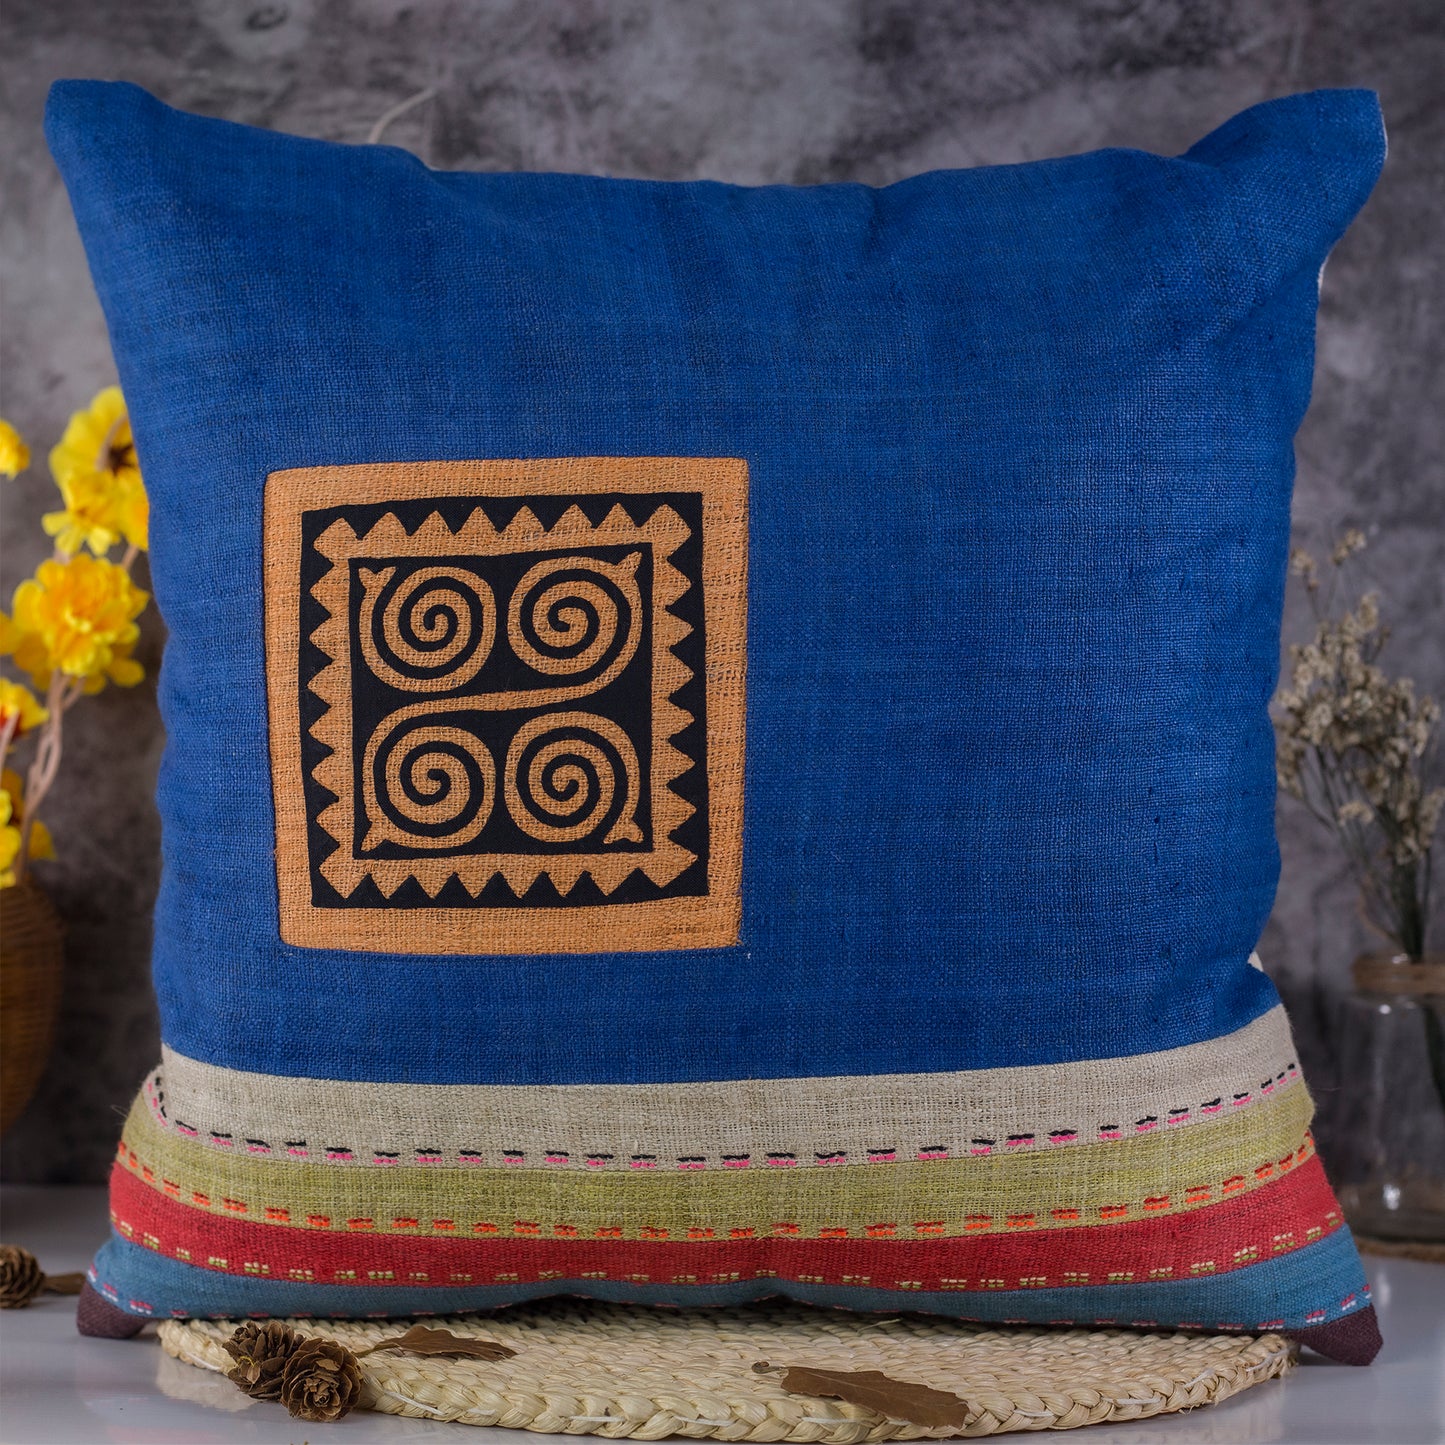 Catalina Blue Hemp Cushion Cover with stripes in different colors, hand-stitched pattern in black and orange